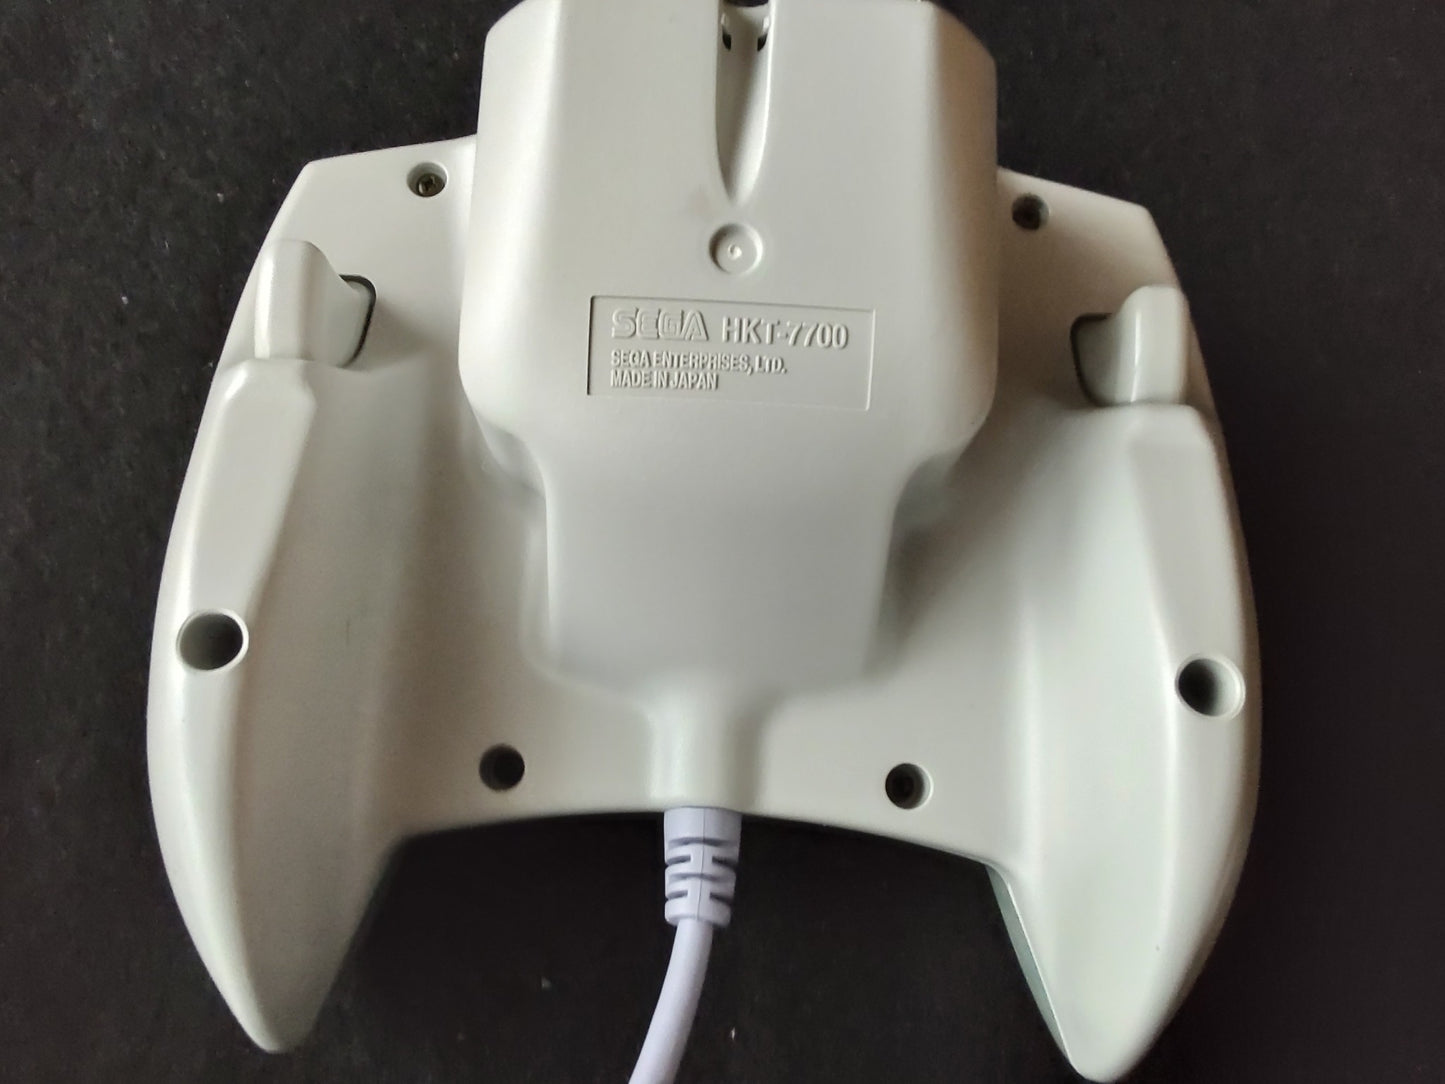 SEGA DreamCast Drean Bank Point HKT-7700 Marble Patern Controller with Box-f0114